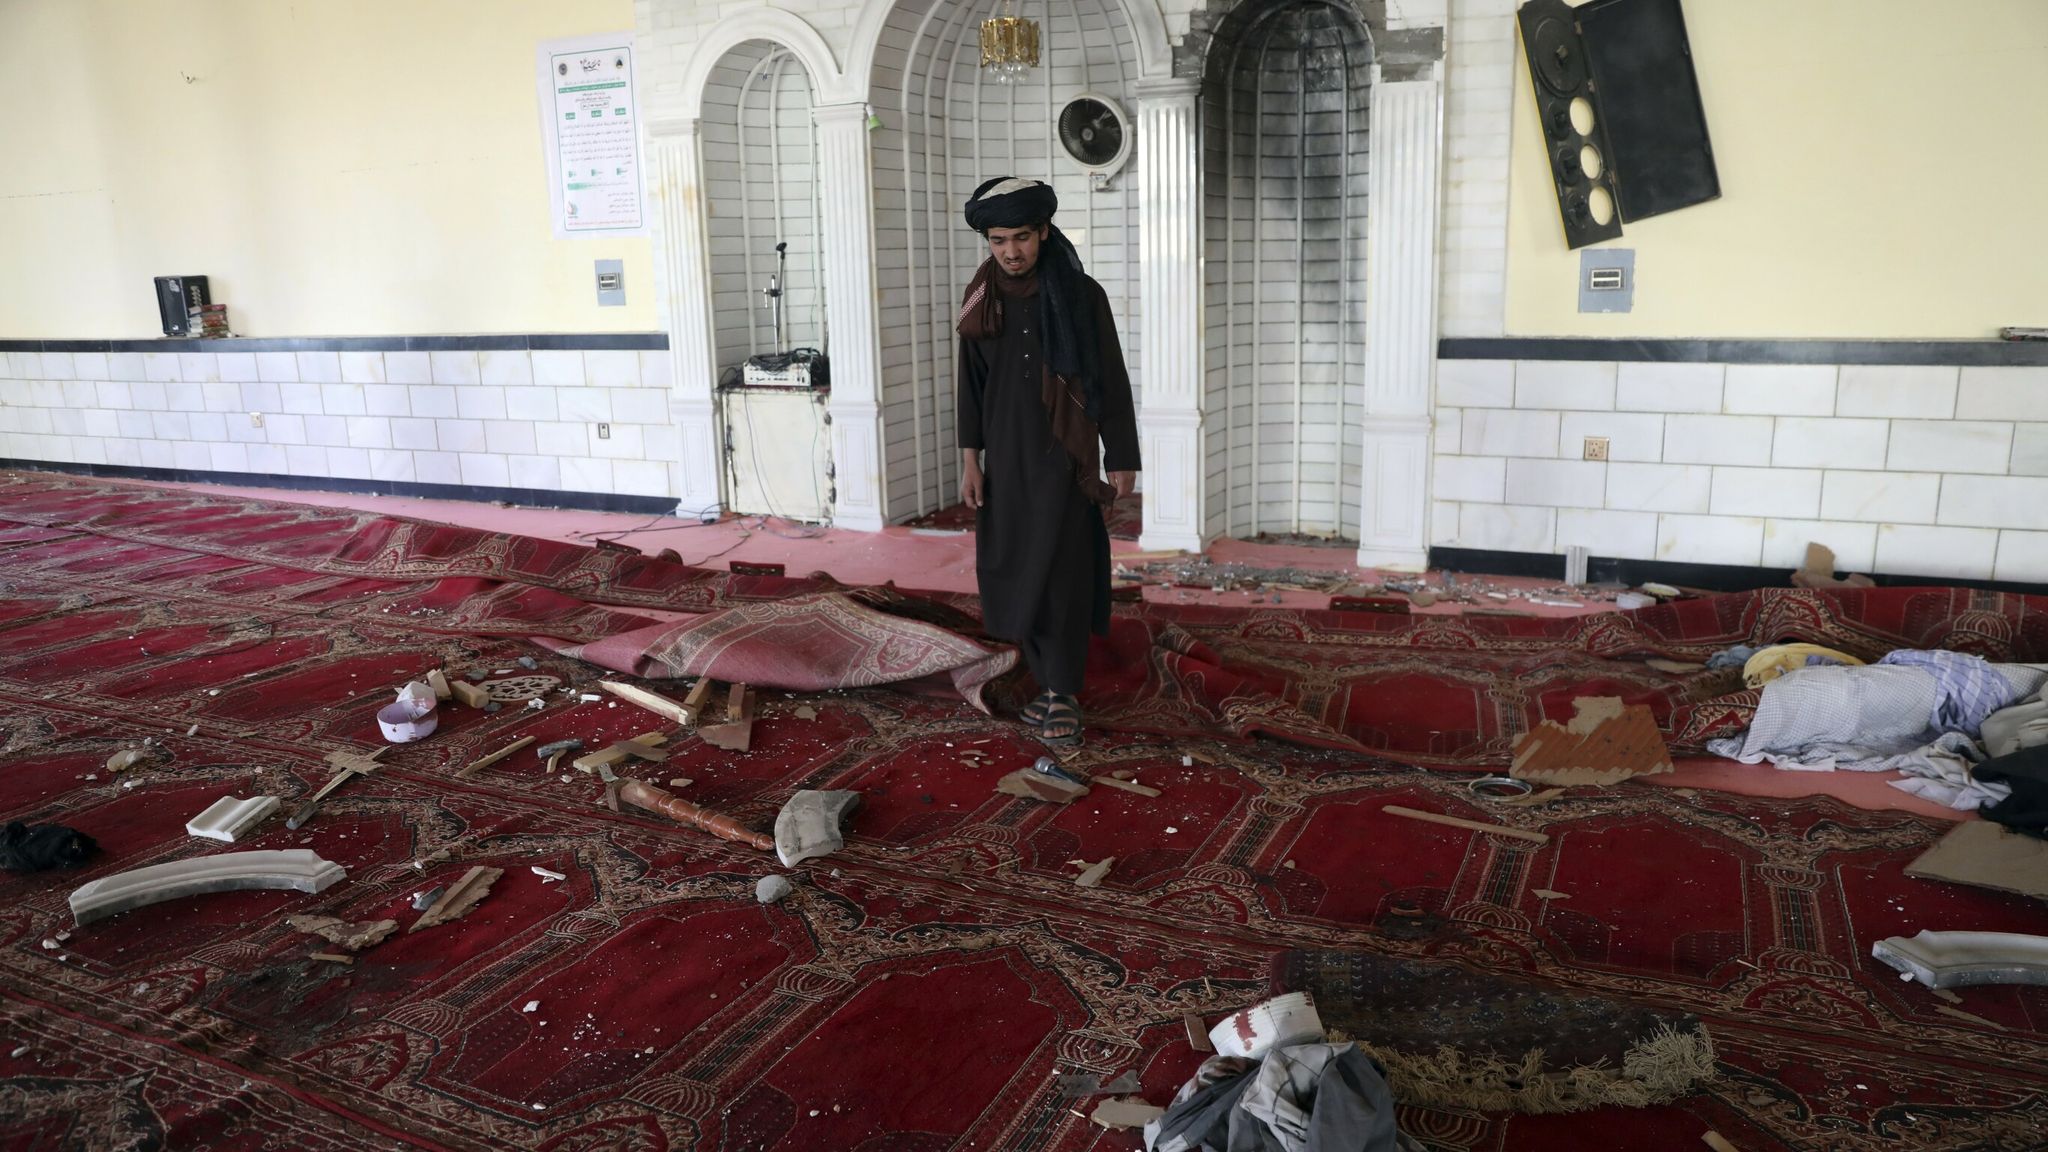 Kabul Imam Among 12 Worshippers Killed In Afghanistan Mosque Bombing During Friday Prayers